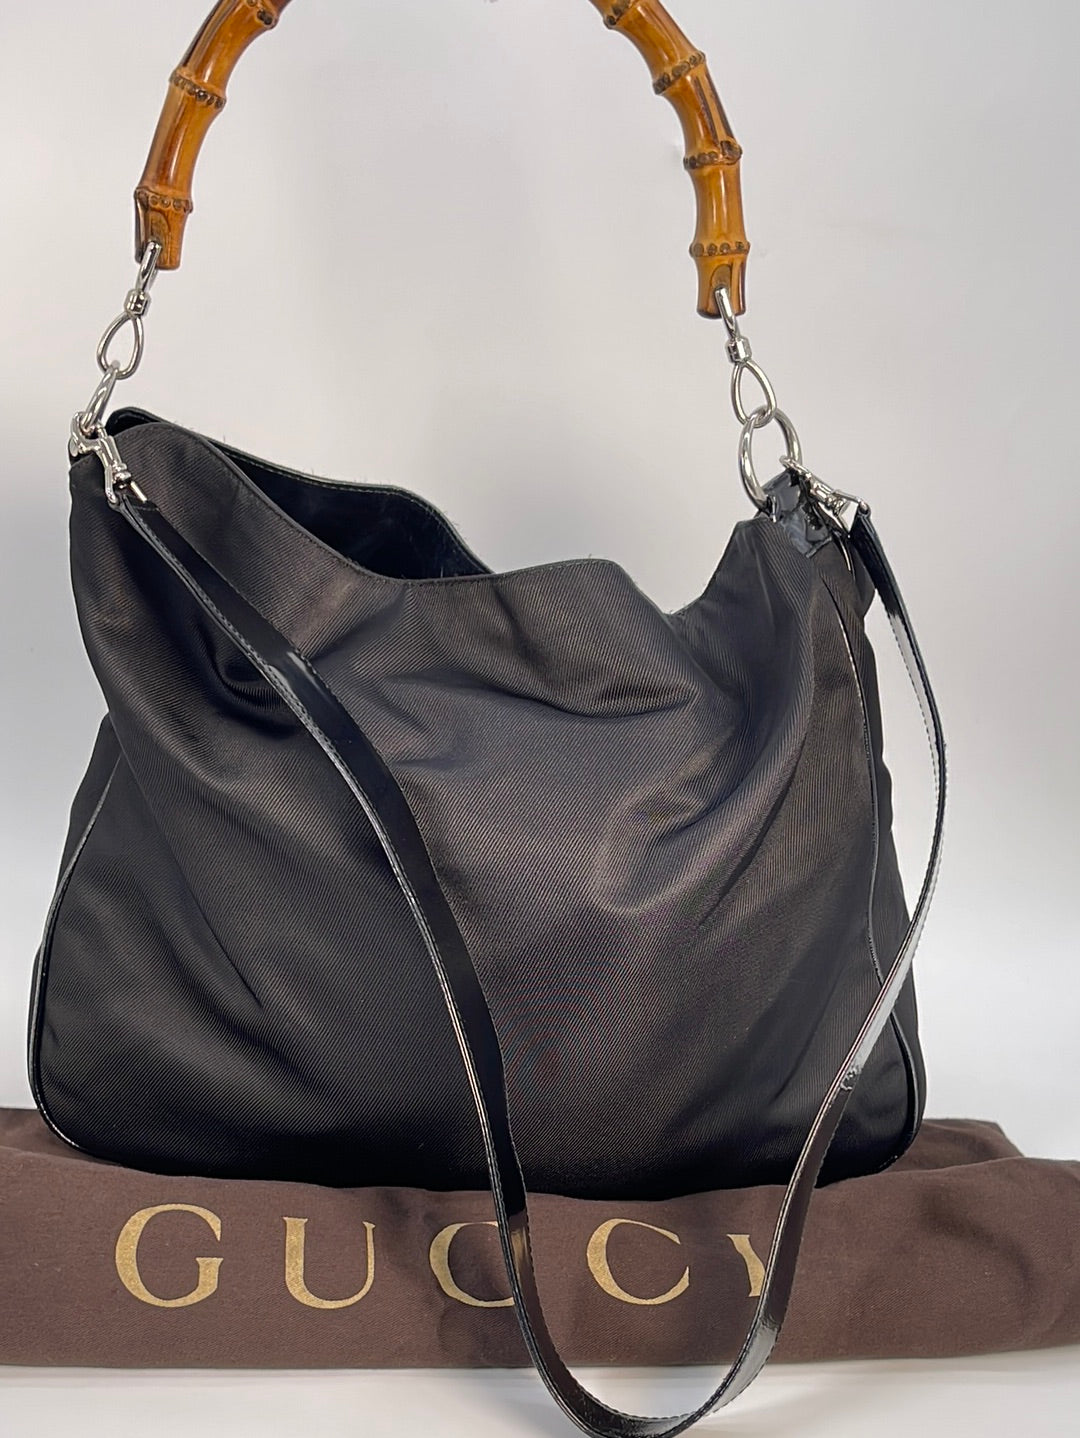 Auth GUCCI Black Leather and Bamboo Handle Tote Shoulder Bag Purse #53252